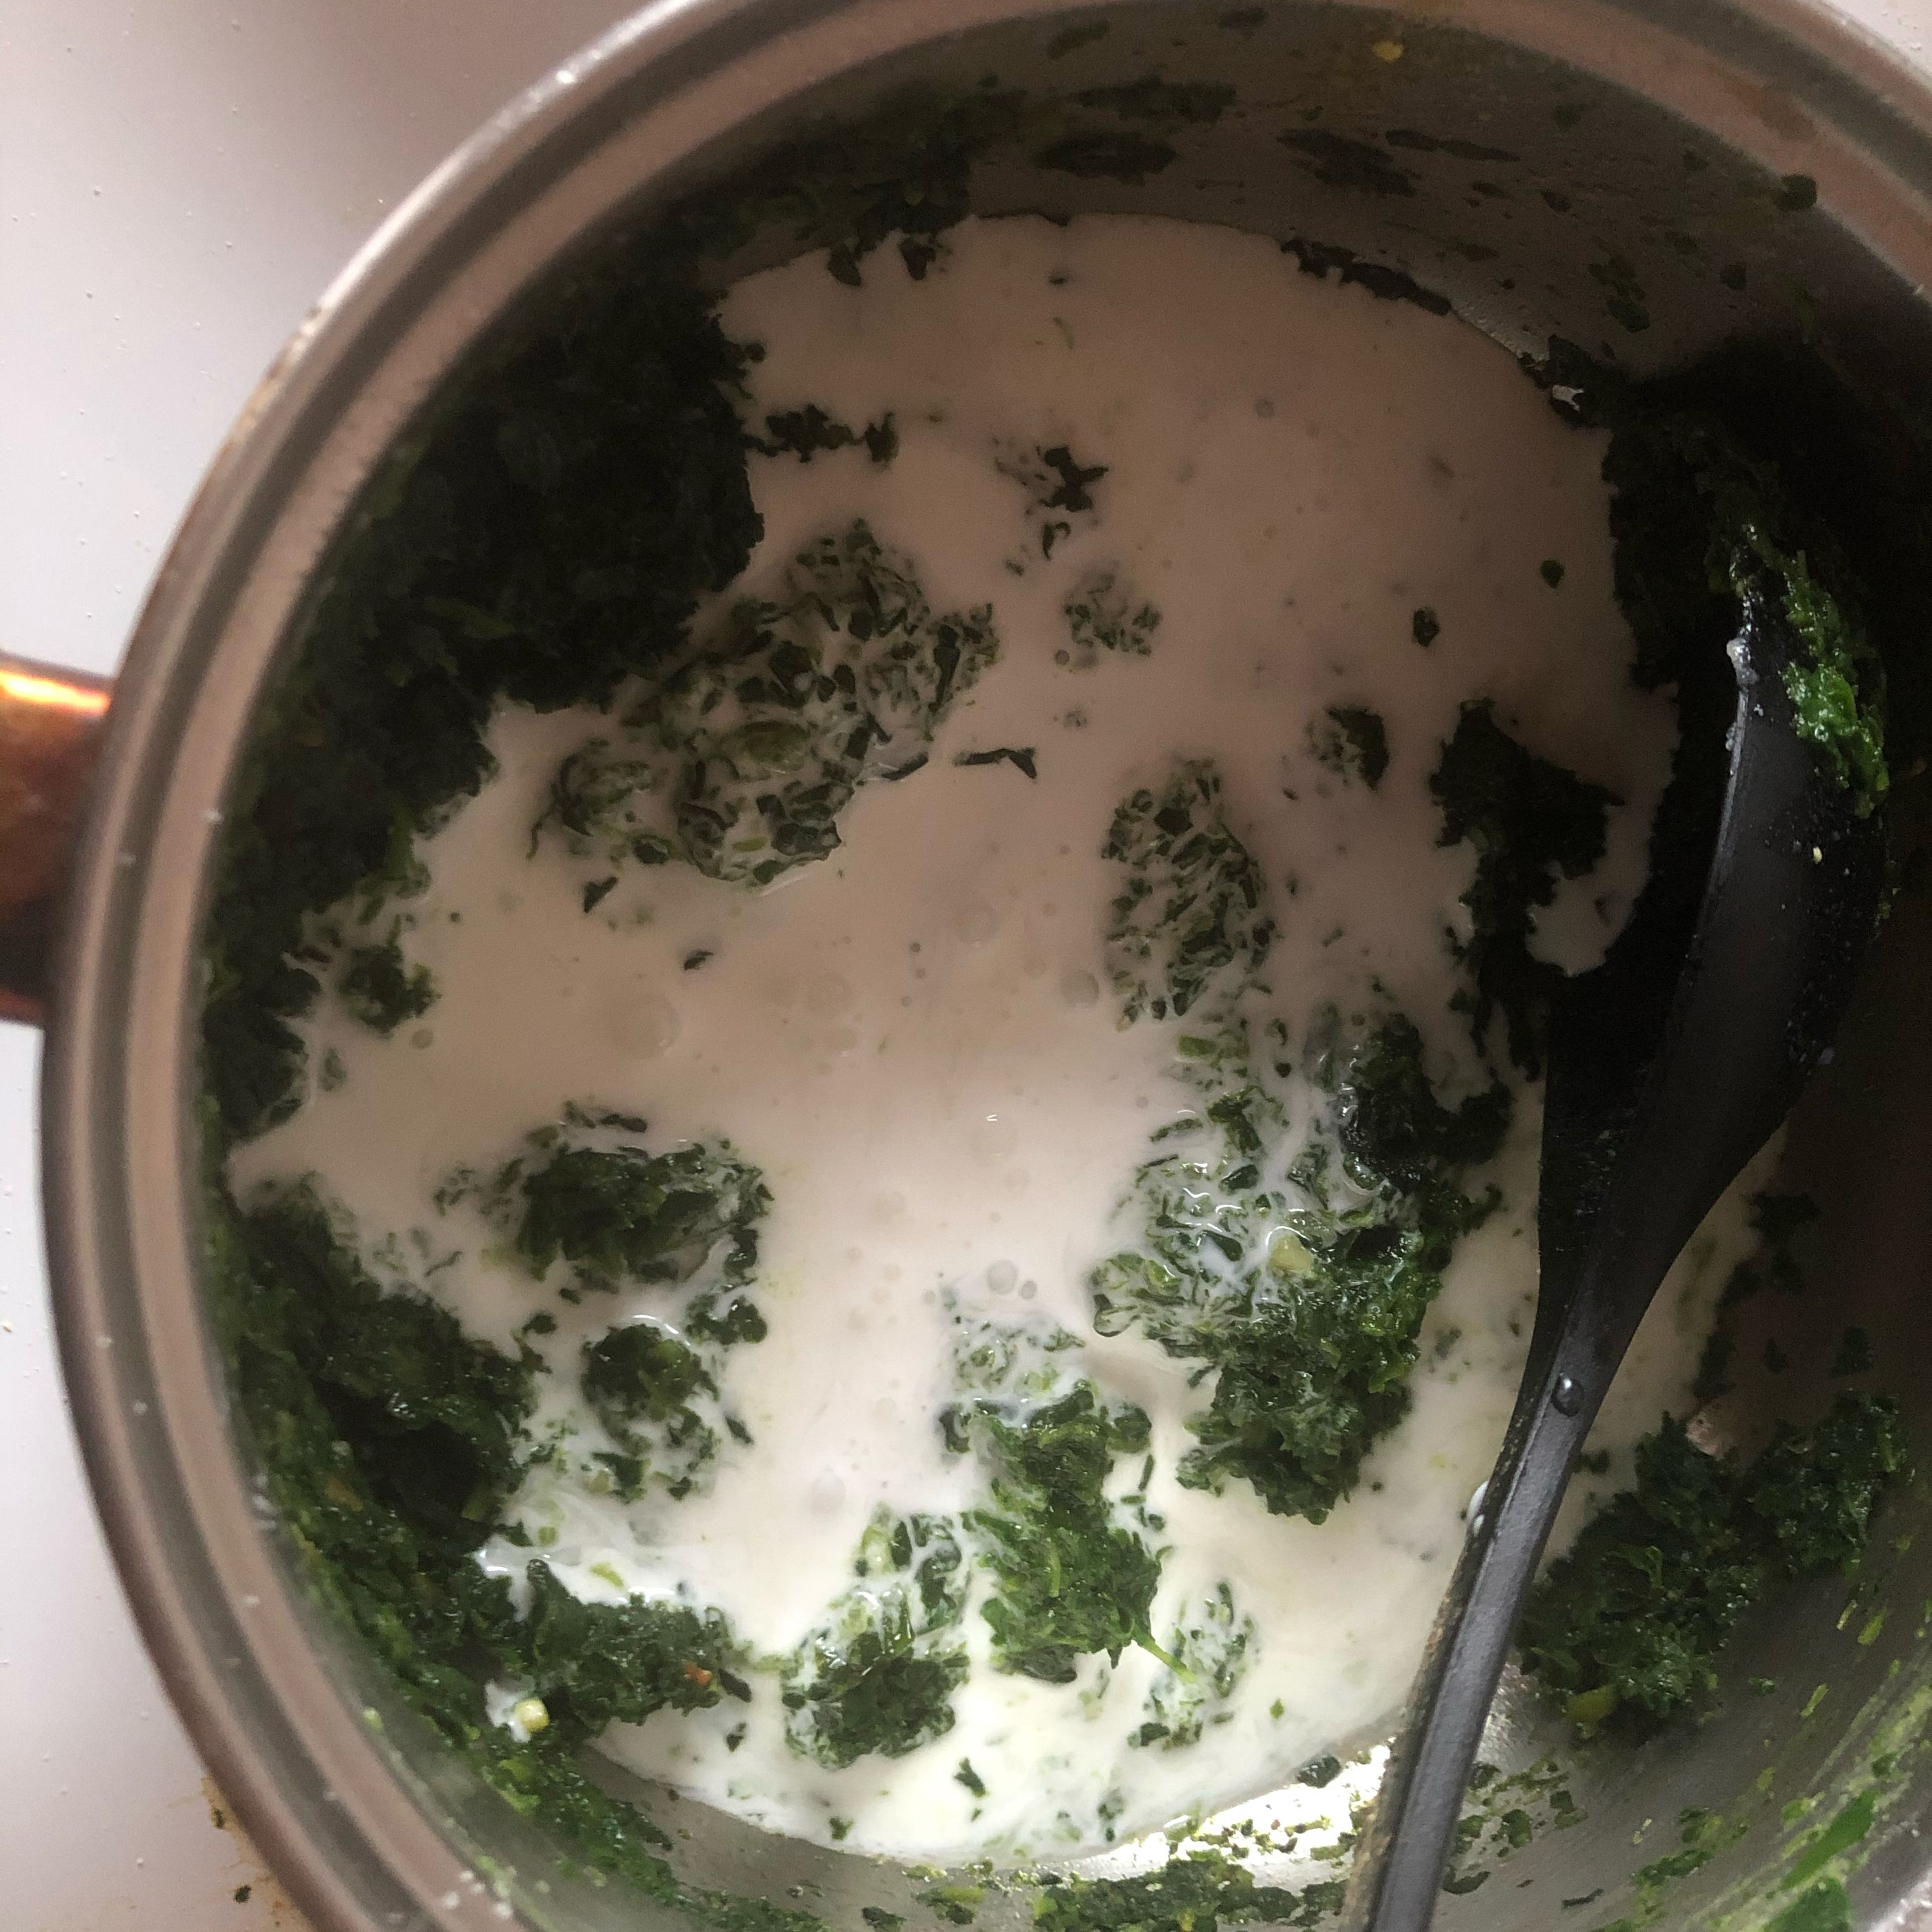 Add cooking cream to the sauce and cook for 5 more minutes with occasional stirring